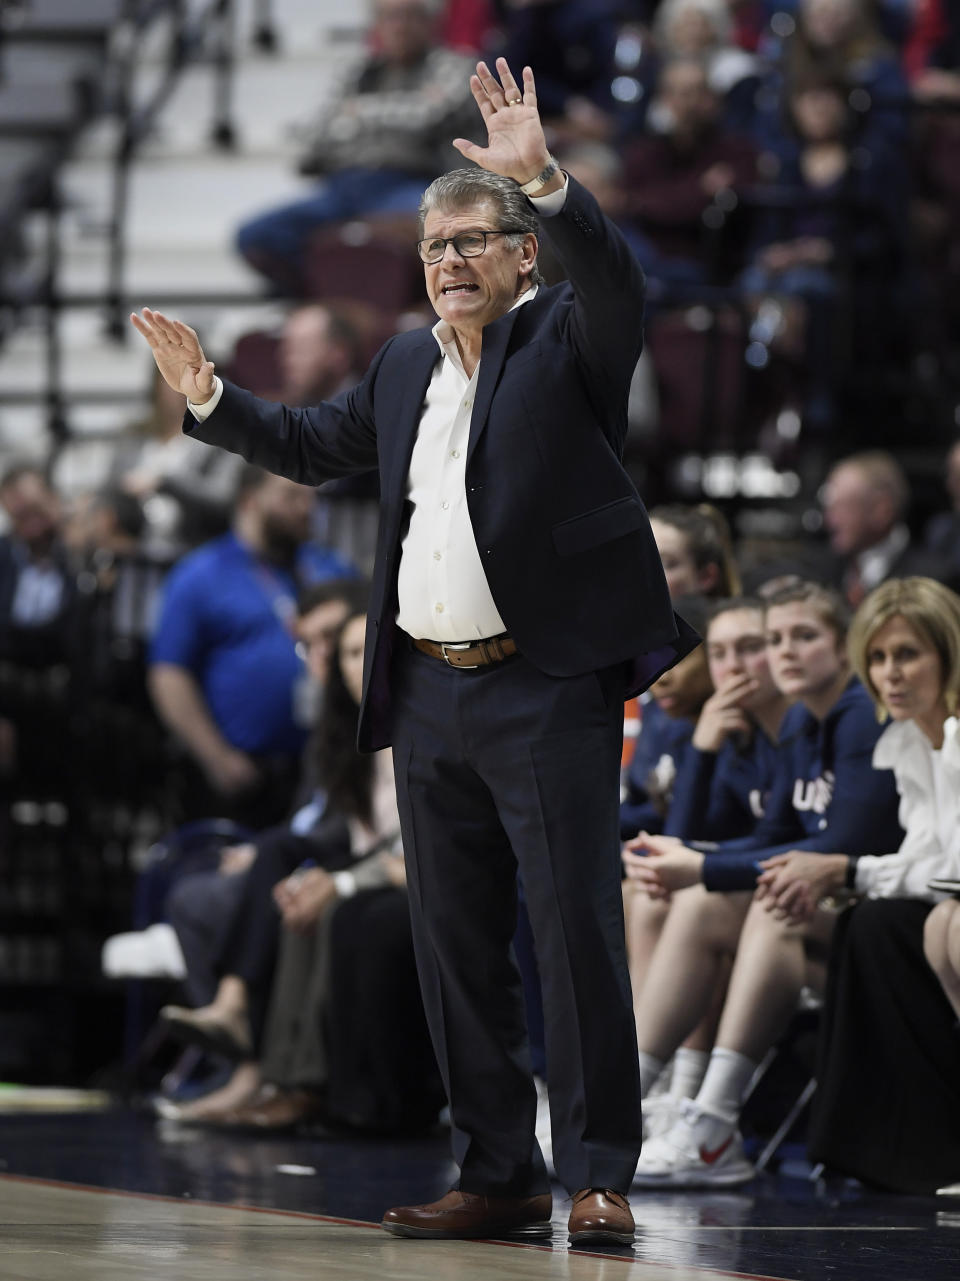 Connecticut head coach Geno Auriemma gestures to his team during the first half of an NCAA college basketball game in the American Athletic Conference tournament quarterfinals against East Carolina, Saturday, March 9, 2019, at Mohegan Sun Arena in Uncasville, Conn. (AP Photo/Jessica Hill)